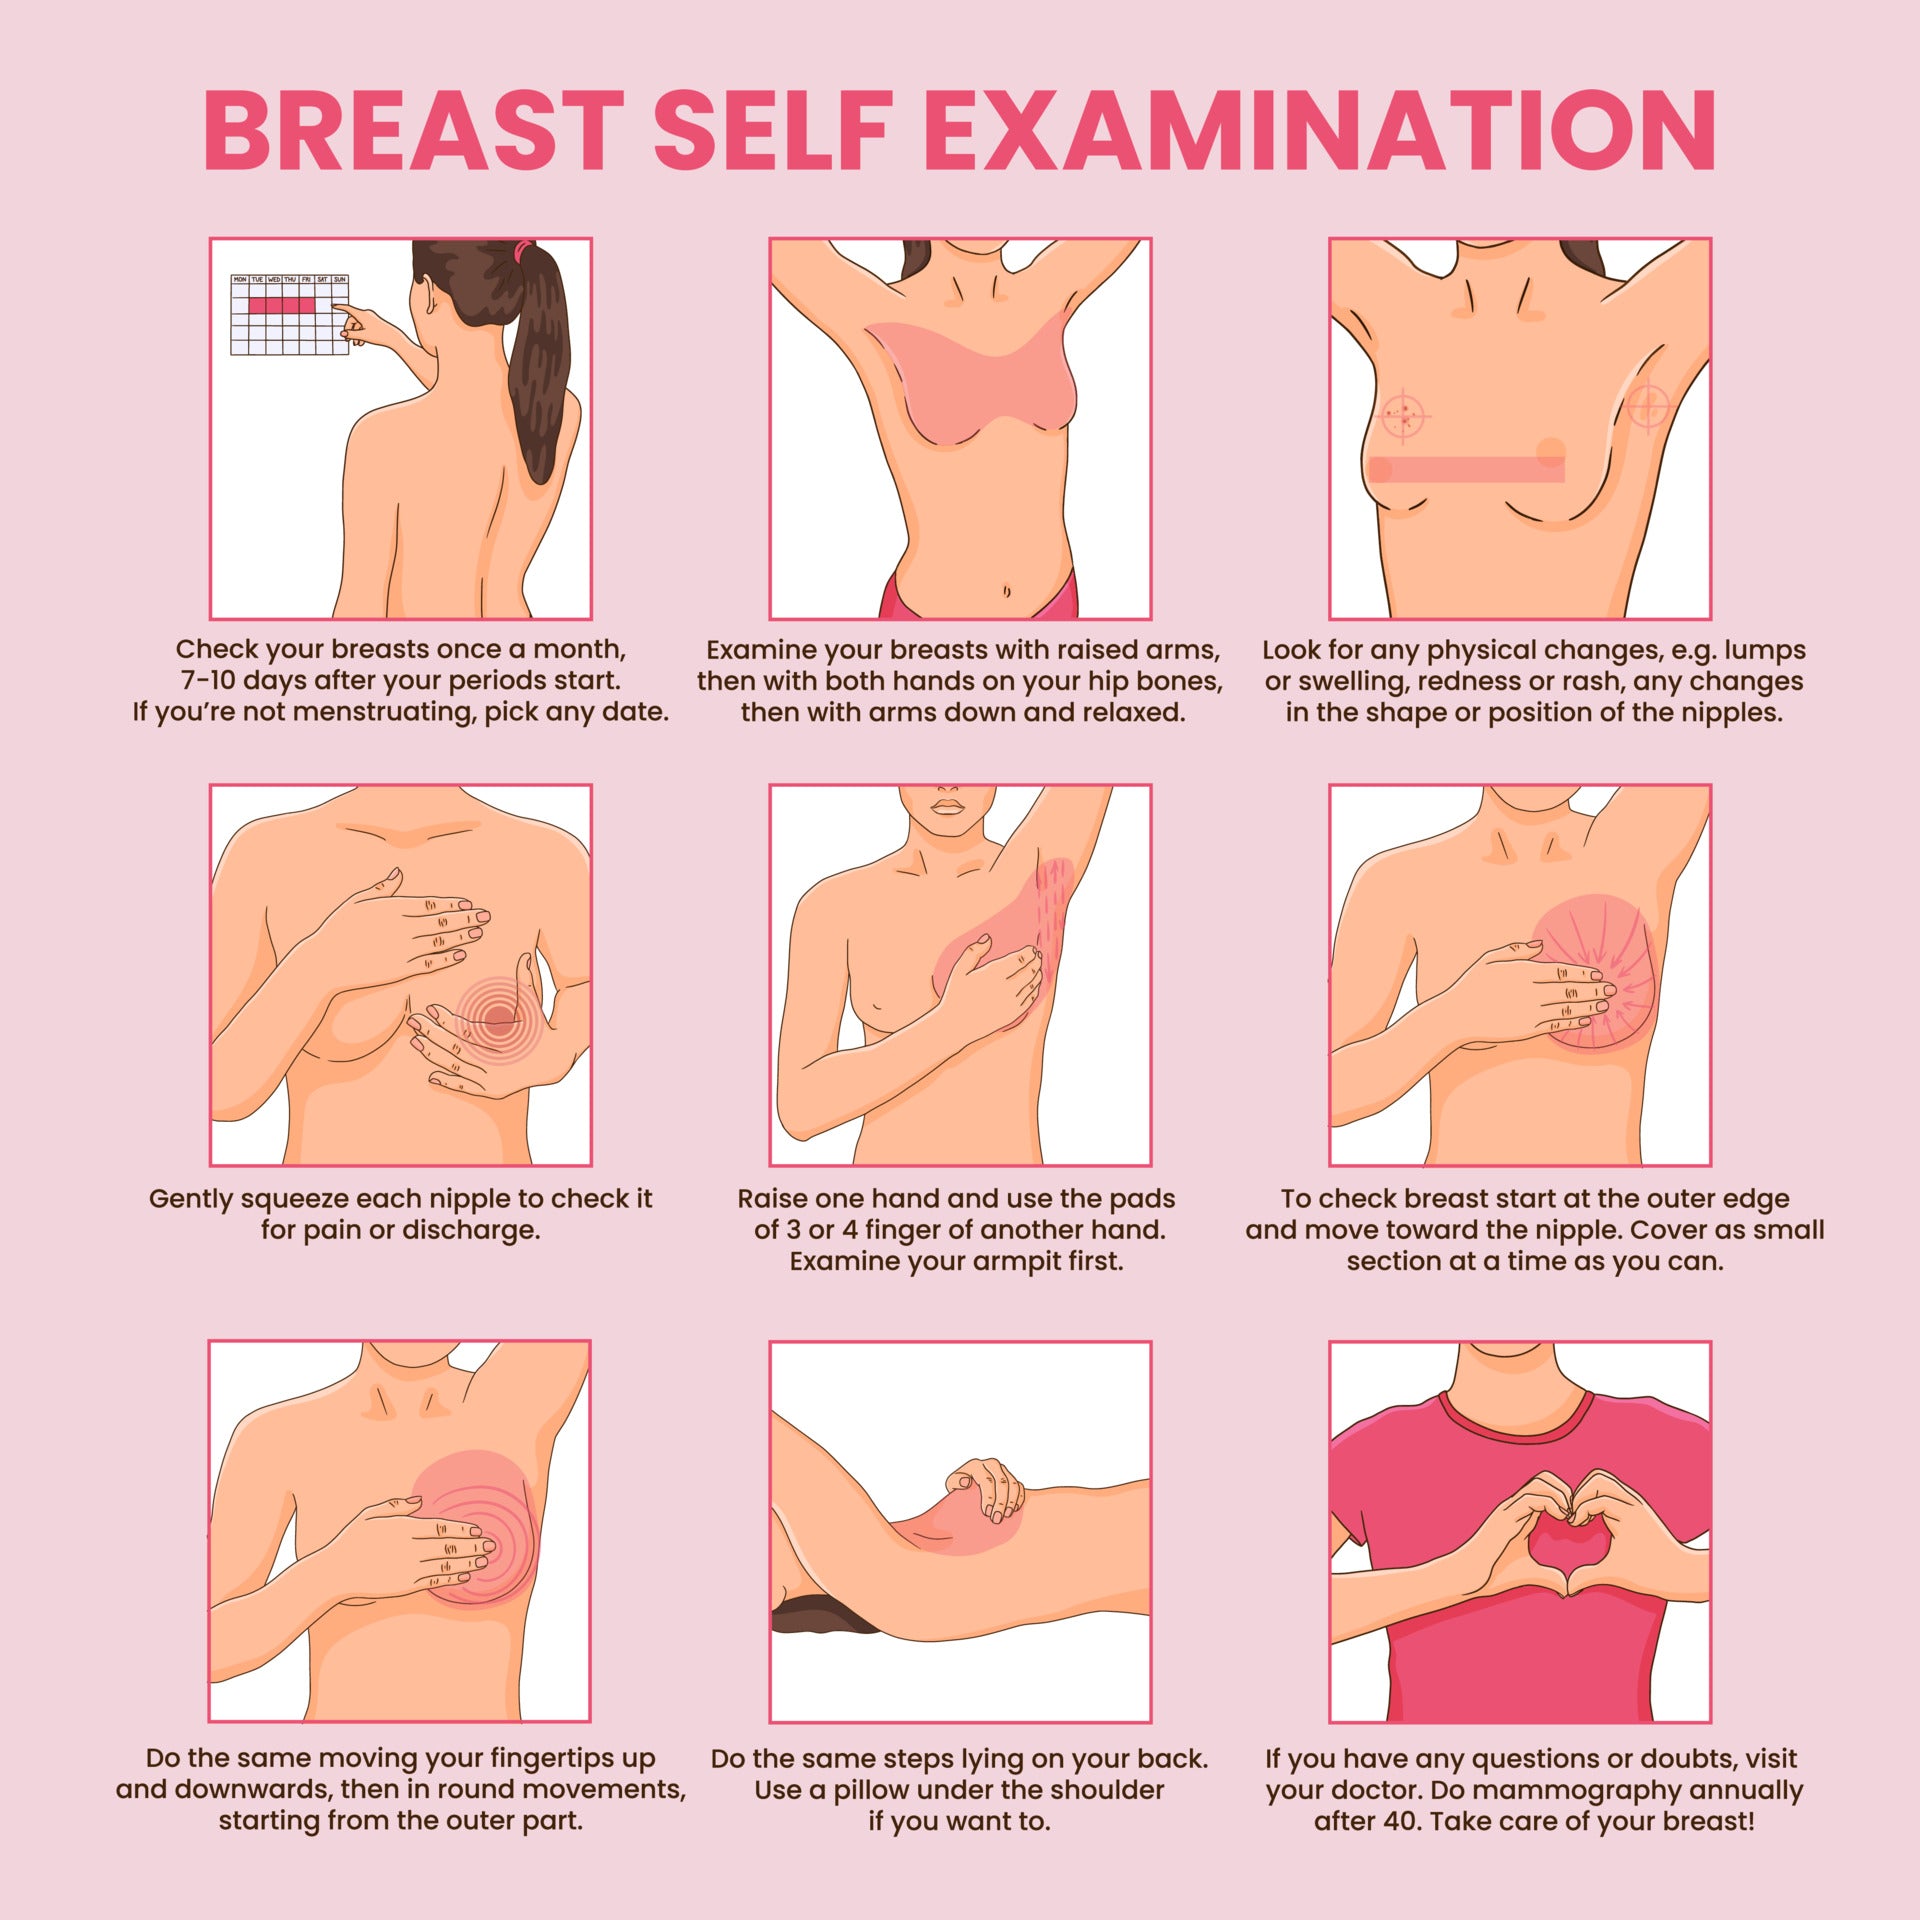 Breast Self-Exams: Lie Down AND Stand Up